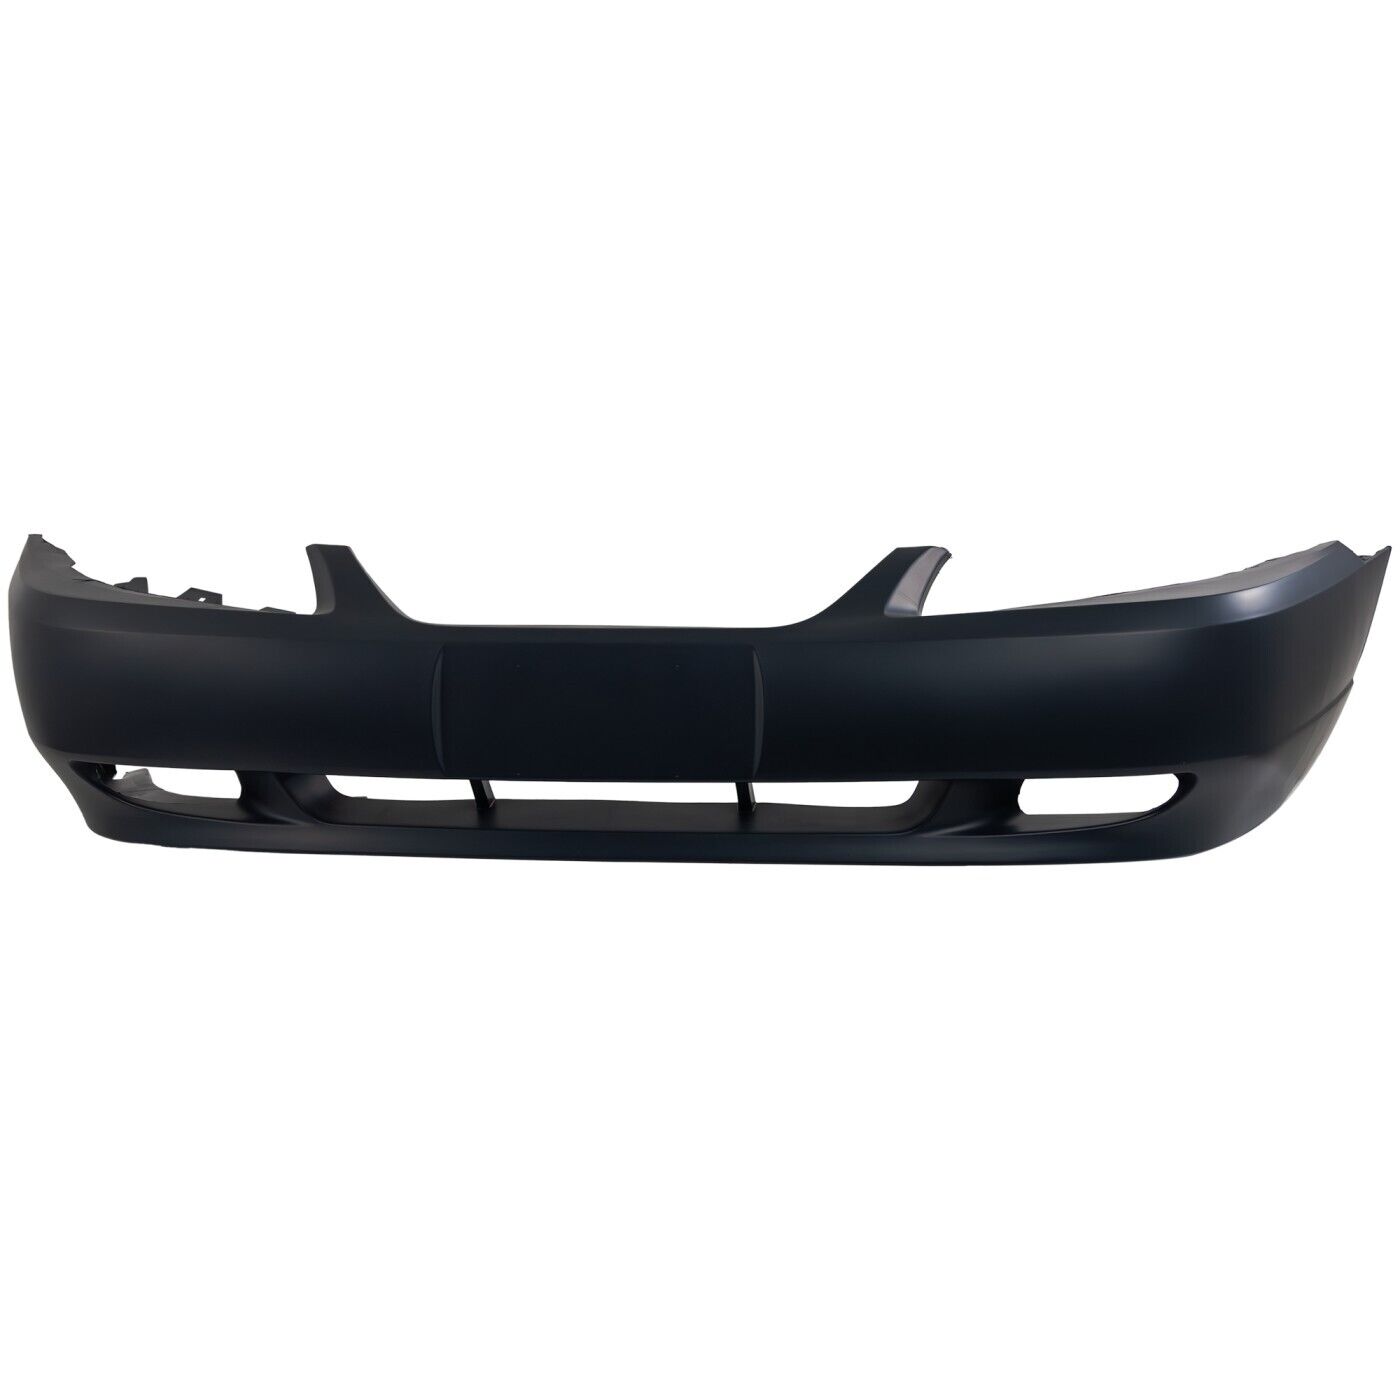 Front Bumper Cover For 99-2004 Ford Mustang w/ fog lamp holes Primed